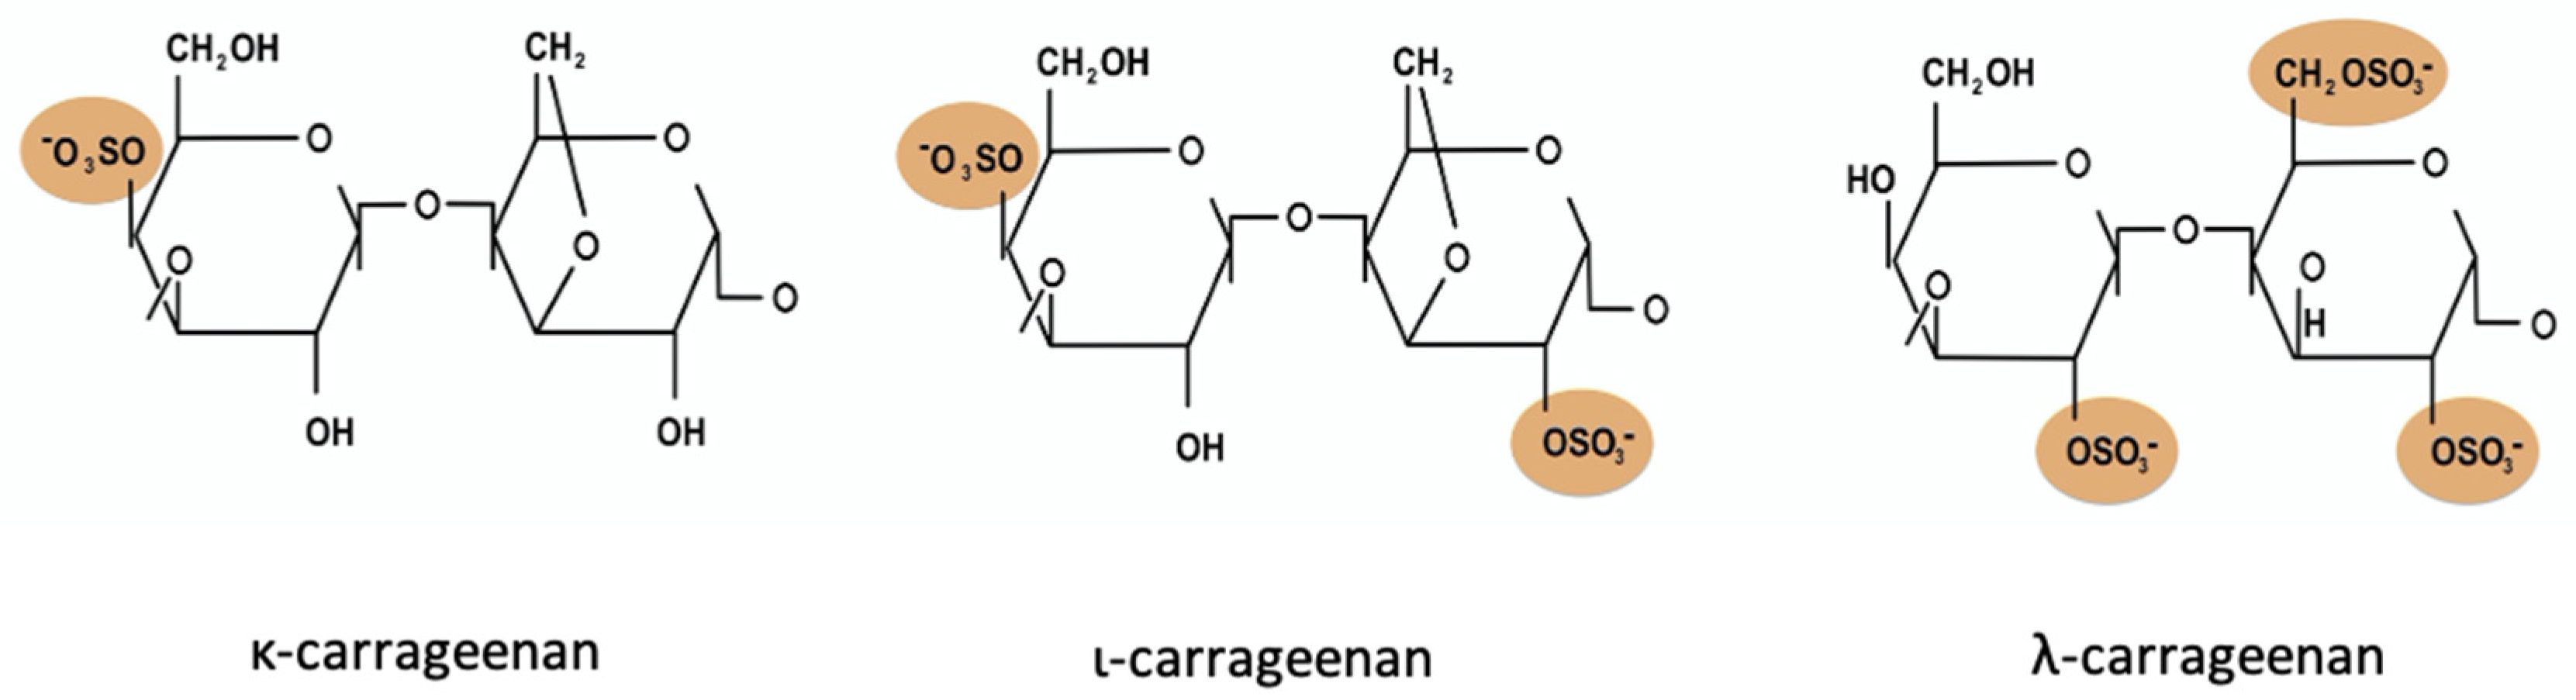 Types of carrageenan used mainly for commercial application